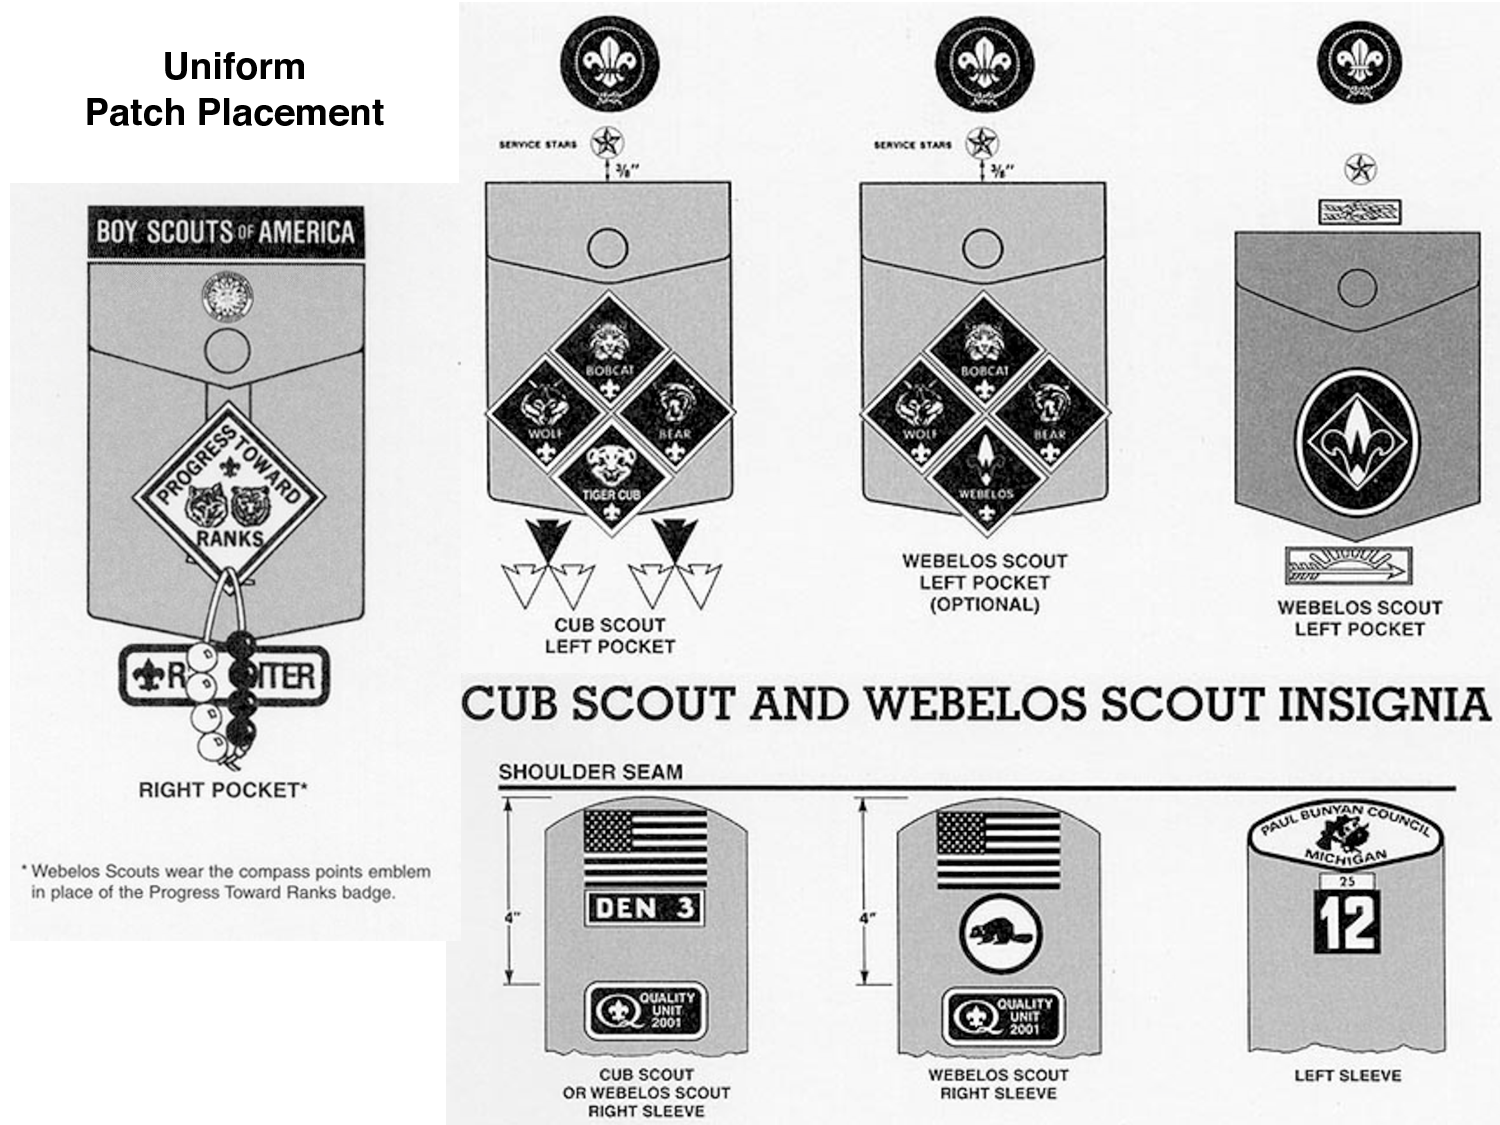 Details on Scouts BSA uniform and handbook availability